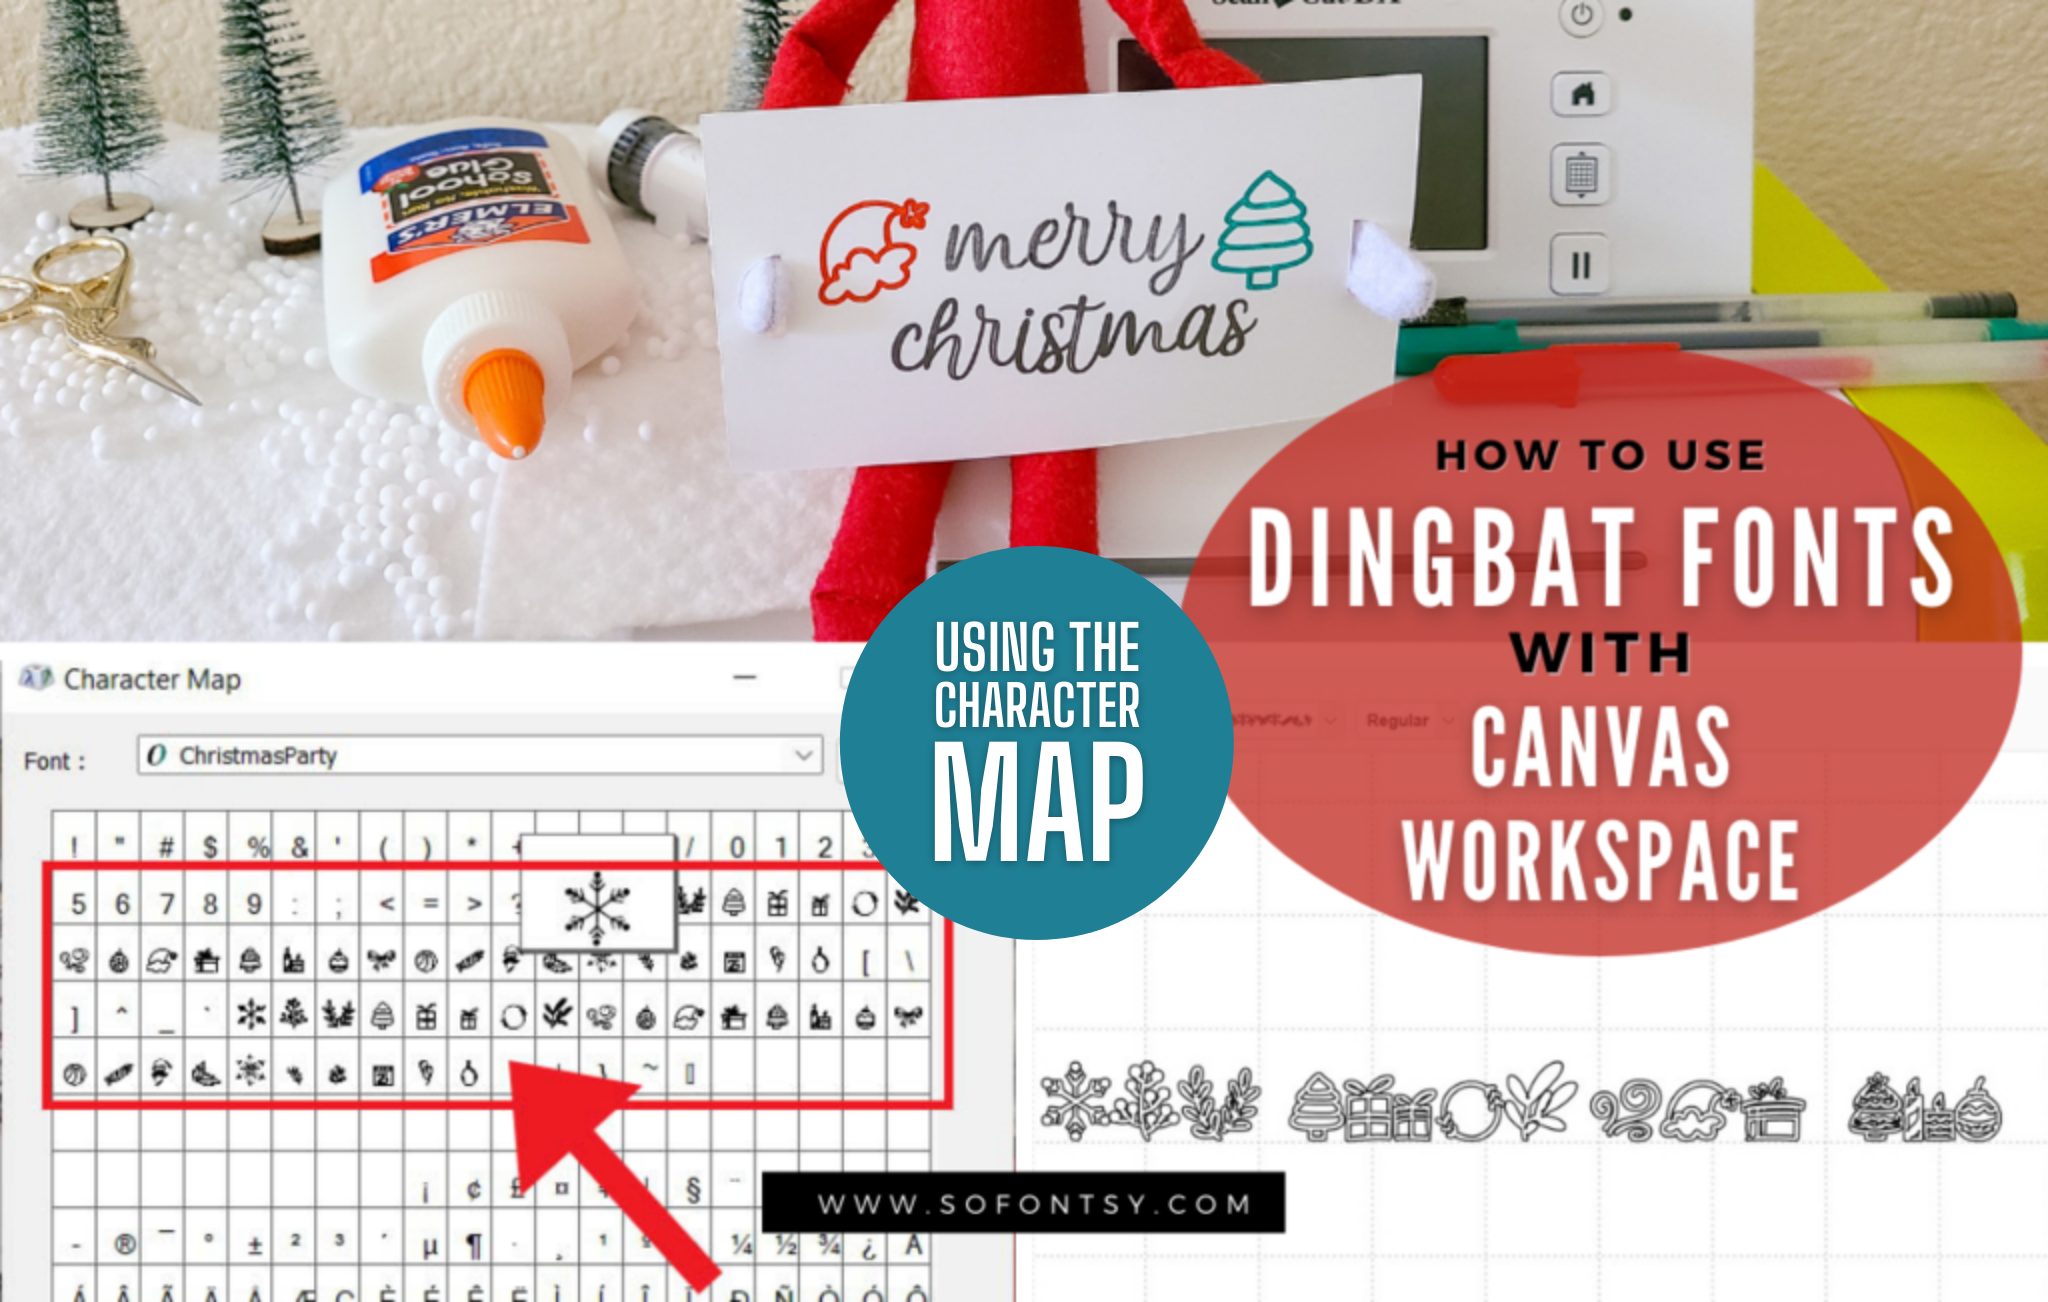 How to Use Dingbat Fonts with Canvas Workspace using the Character Map PC Windows